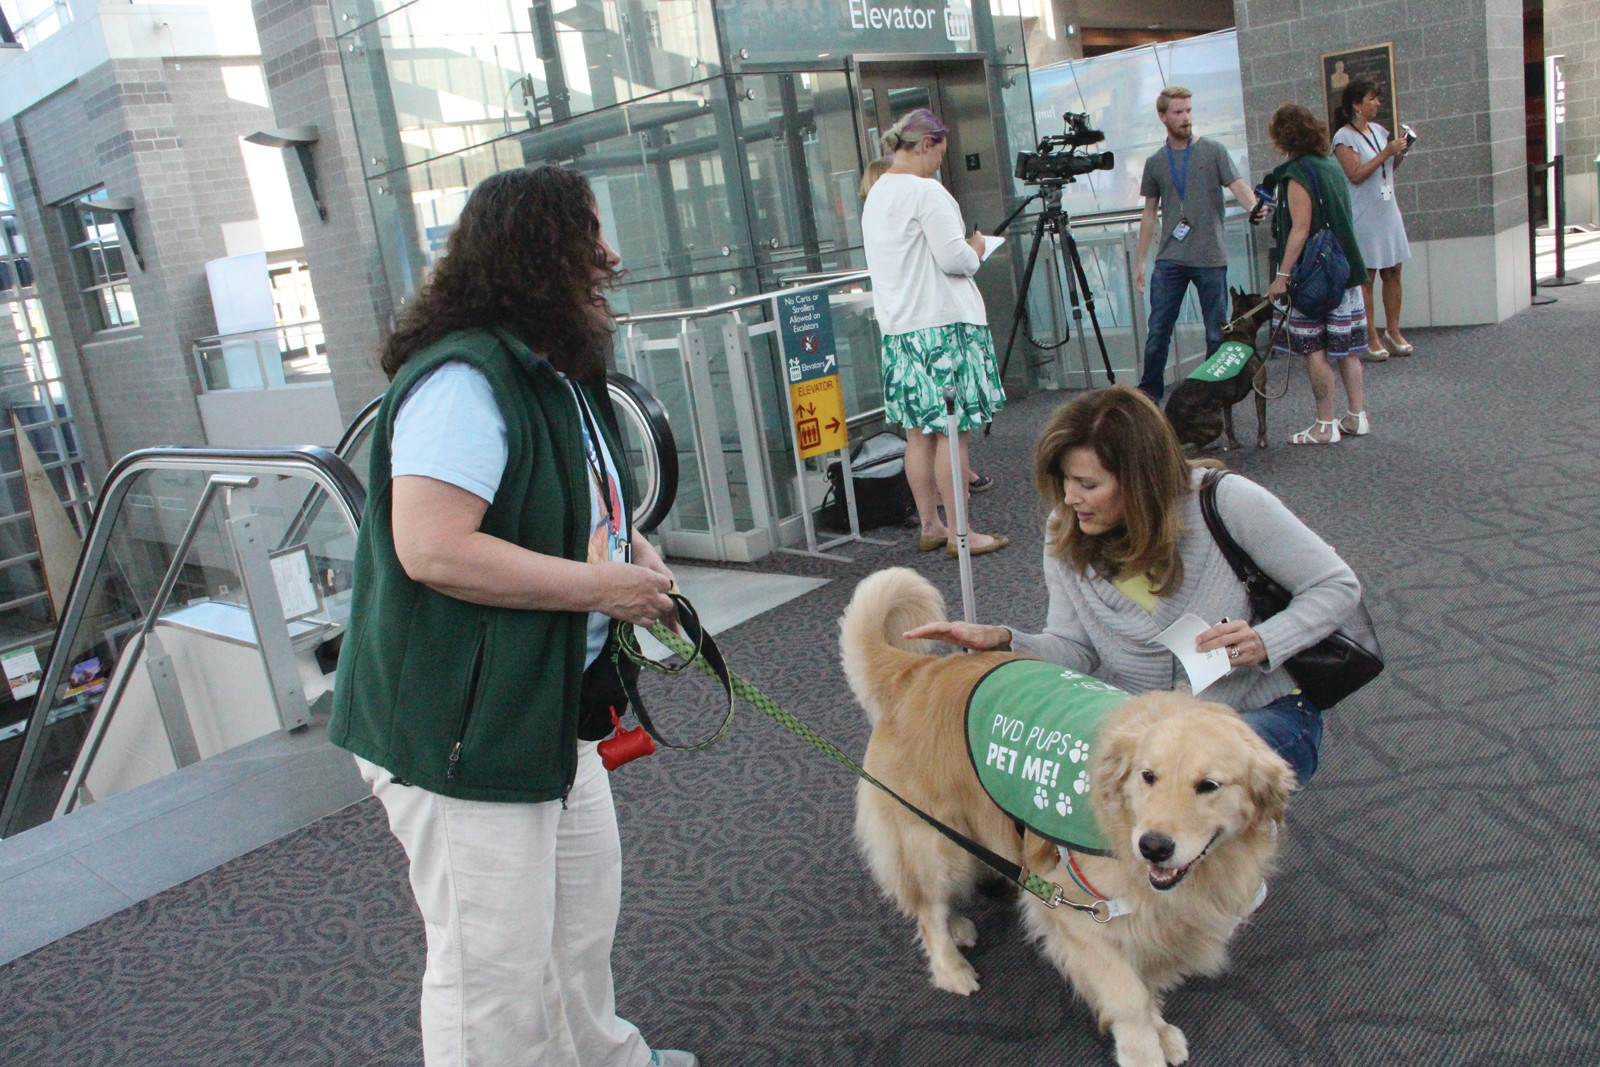 Pet Me: As handler Laurie Cary looks on, Golden Retriever Fenway gets a few pats from Jennifer Nelson from Austin, TX, who owns three goldens of her own.  Nelson is traveled to Rhode Island for a tech conference, and is inspired to start a similar program at the airport back at home.